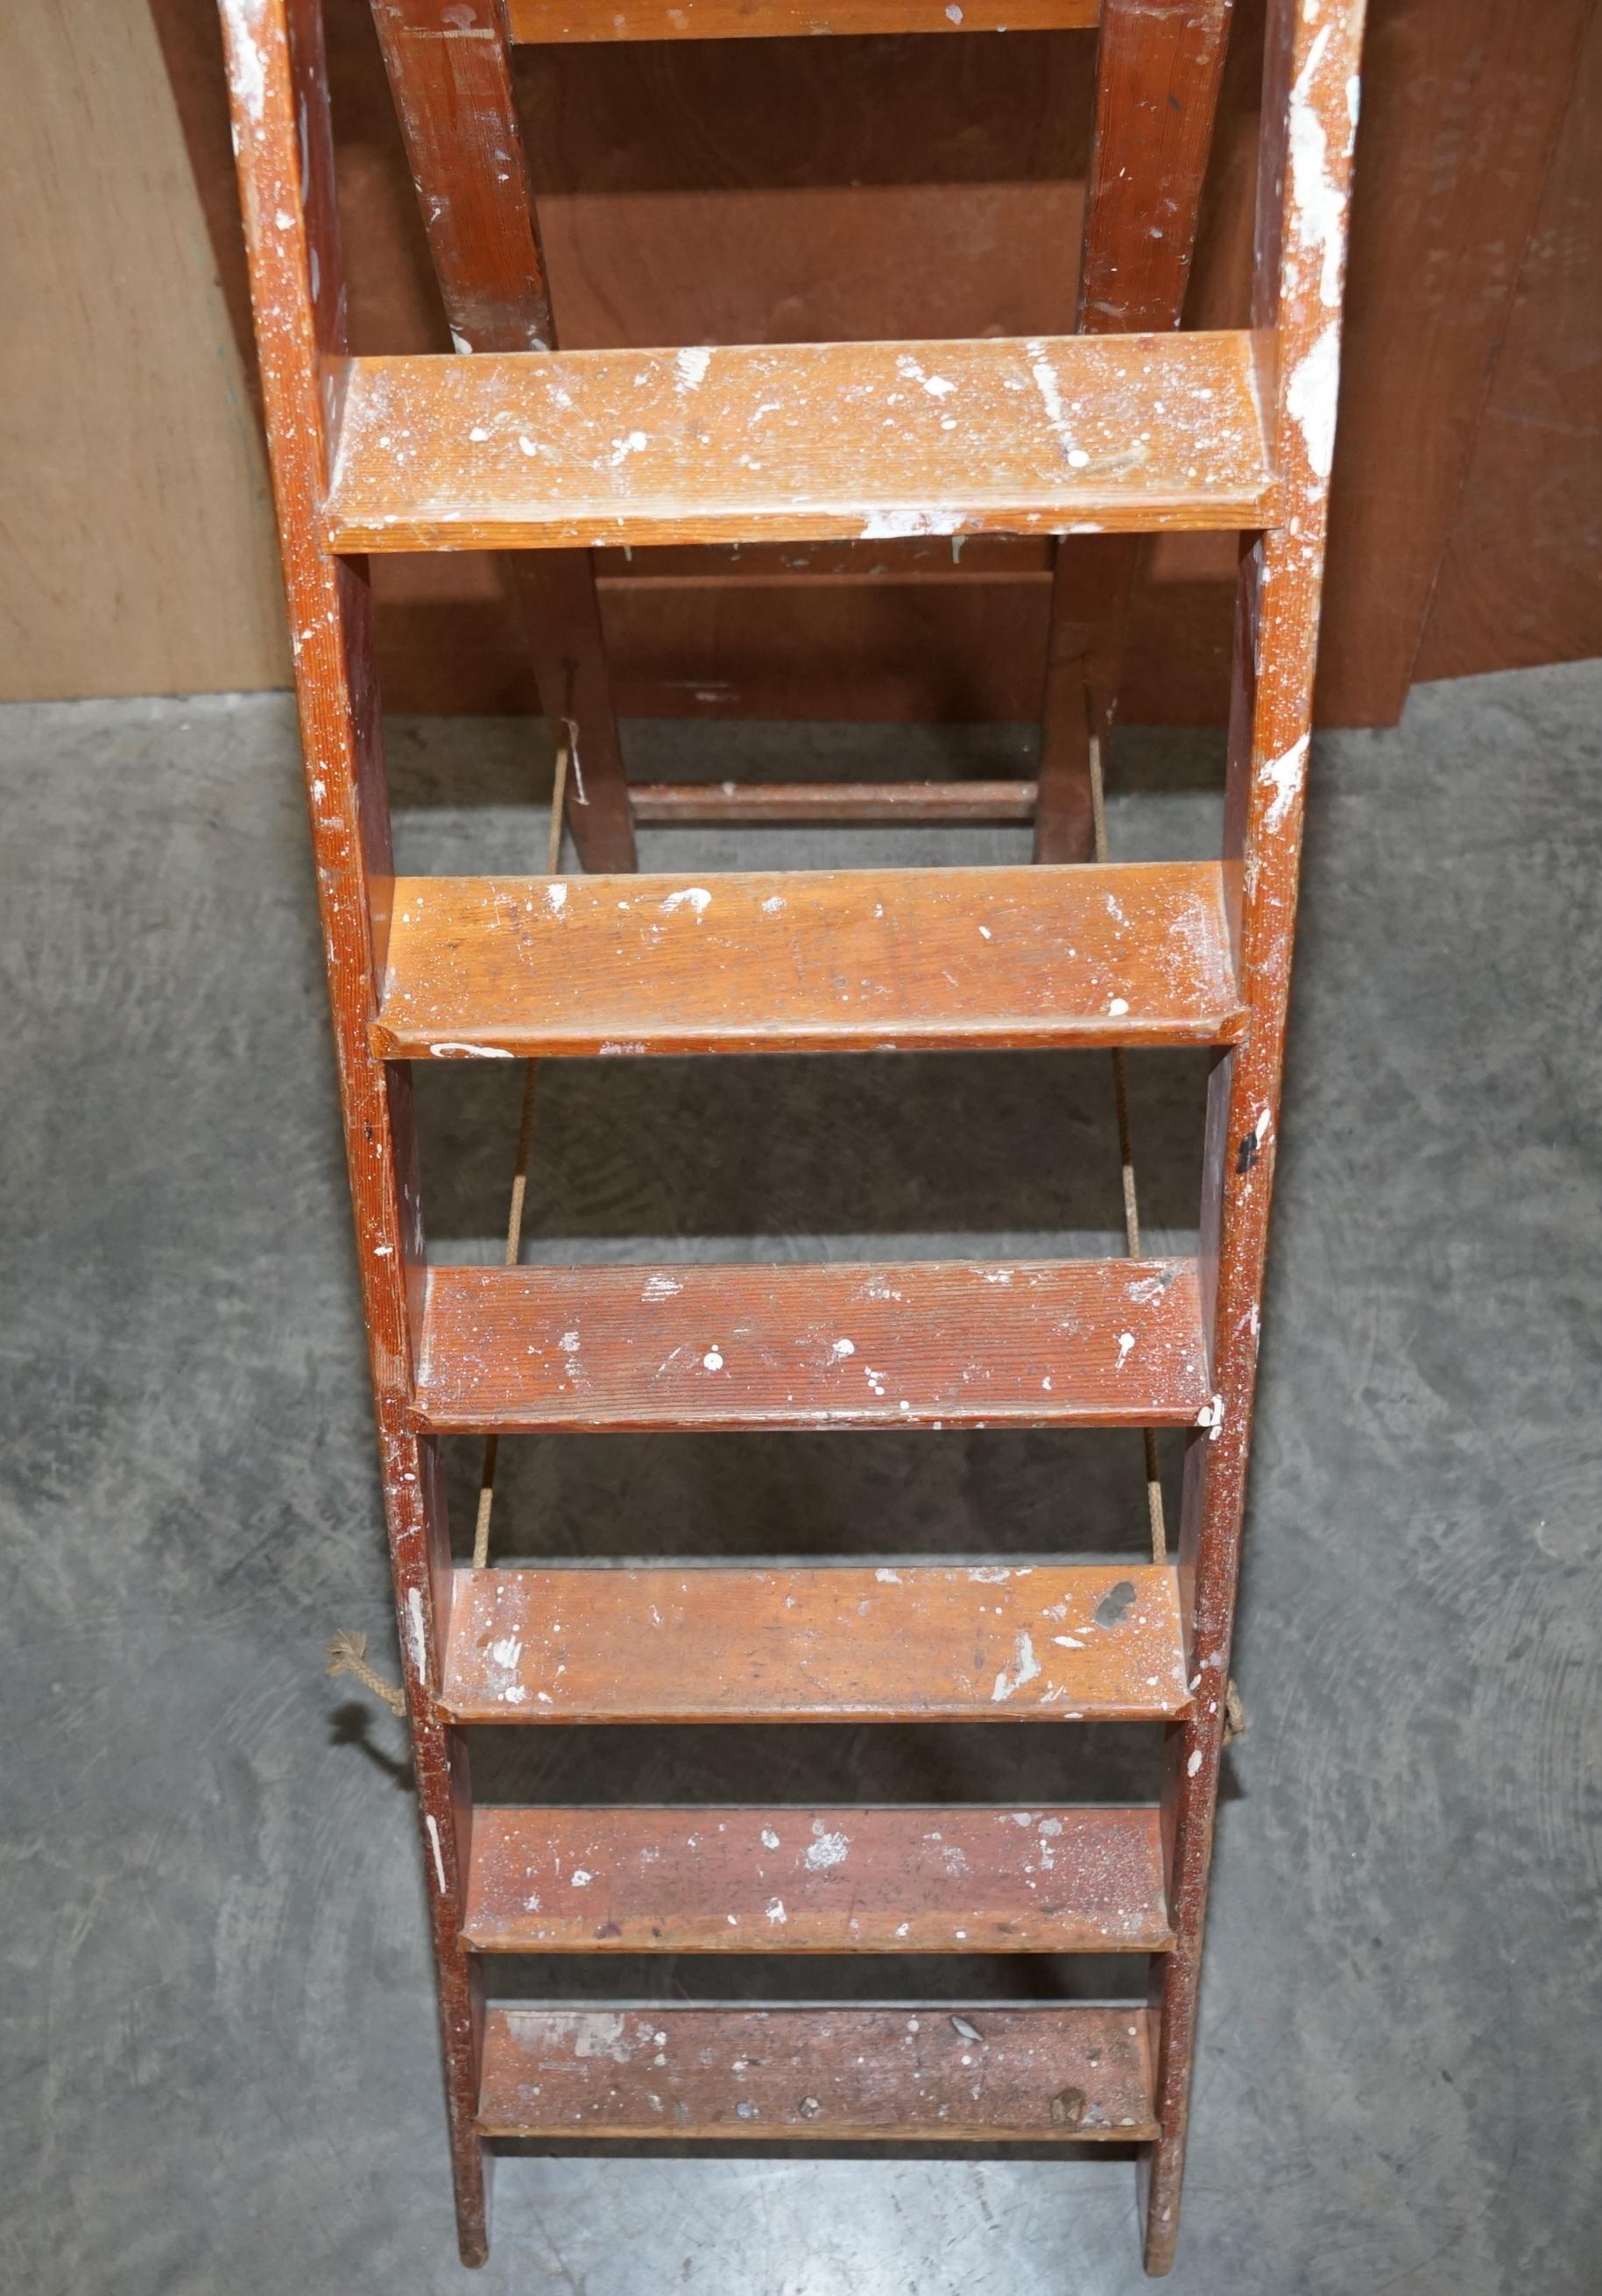 Edwardian Antique Original Patina Painted Finish Red Tall Library Bookcase Steps Ladder For Sale